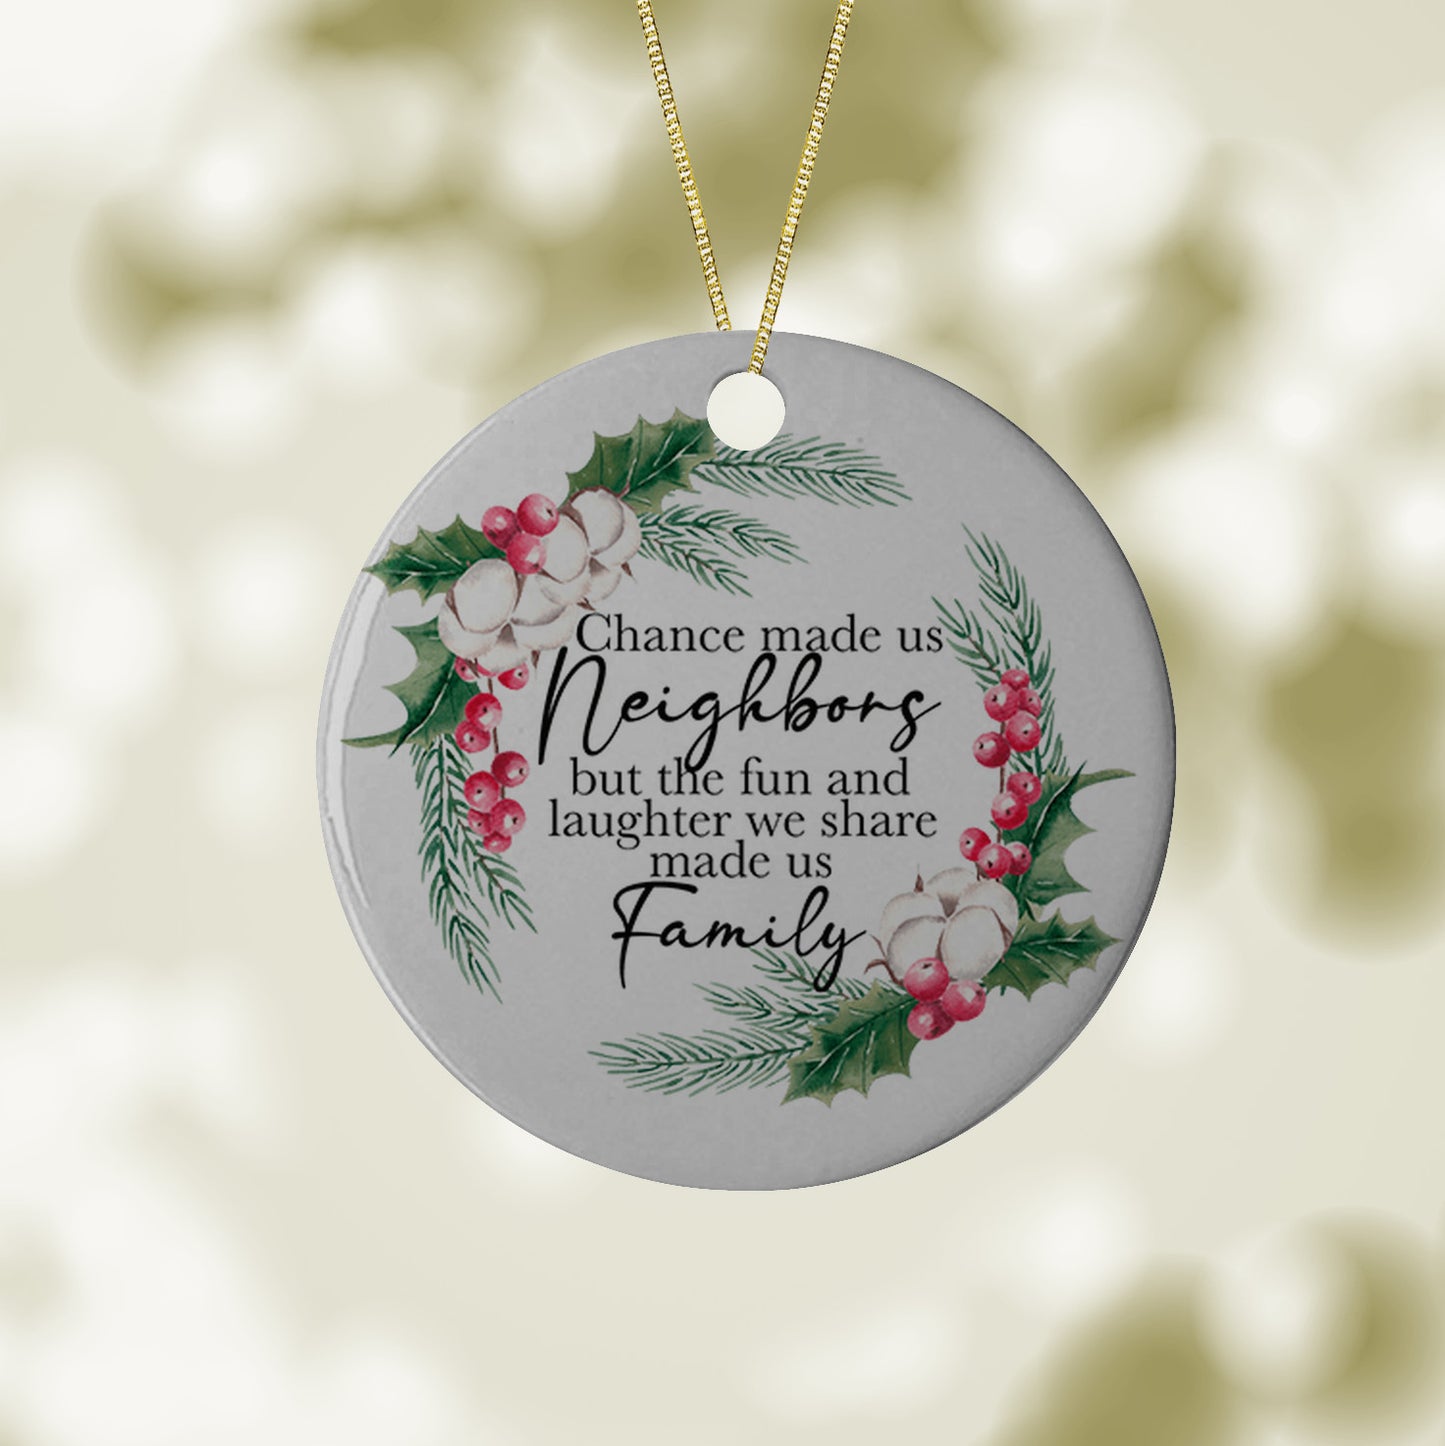 Chance Made Us Neighbors But The Fun And Laughter We Share Made Us Family Ornament,Christmas Gift For Neighbor